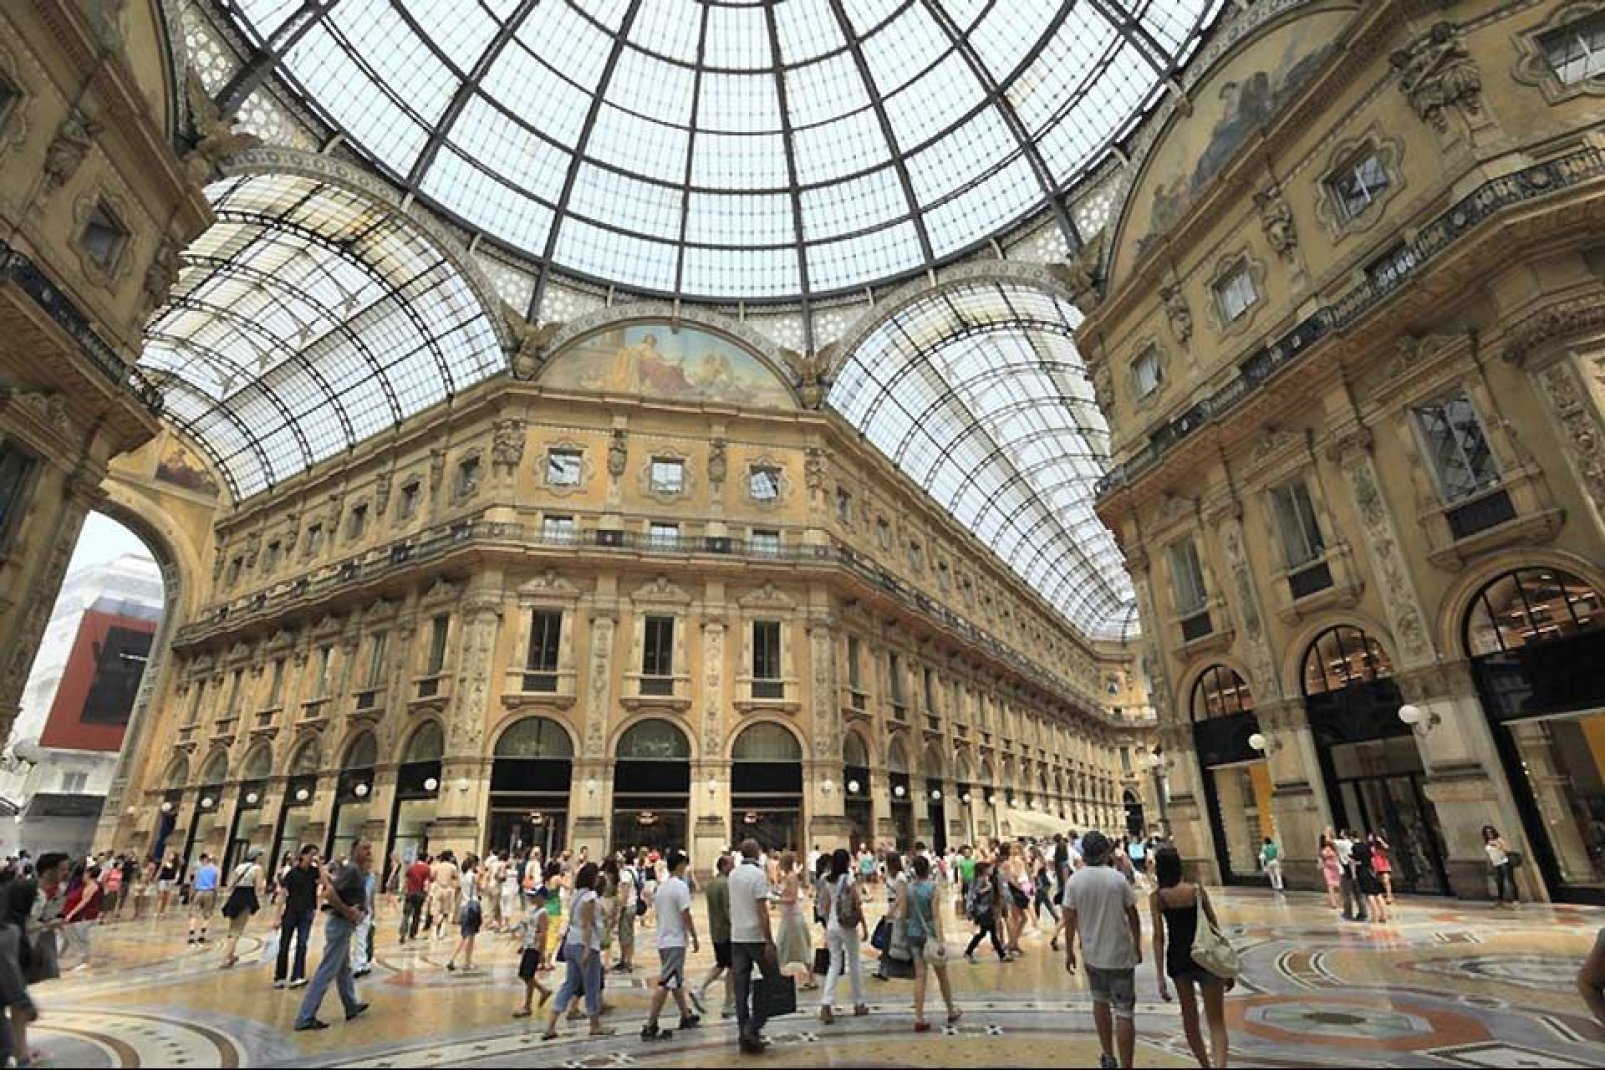 Standing right in the centre of the city, this 19th century gallery is a shopping mecca in Milan.